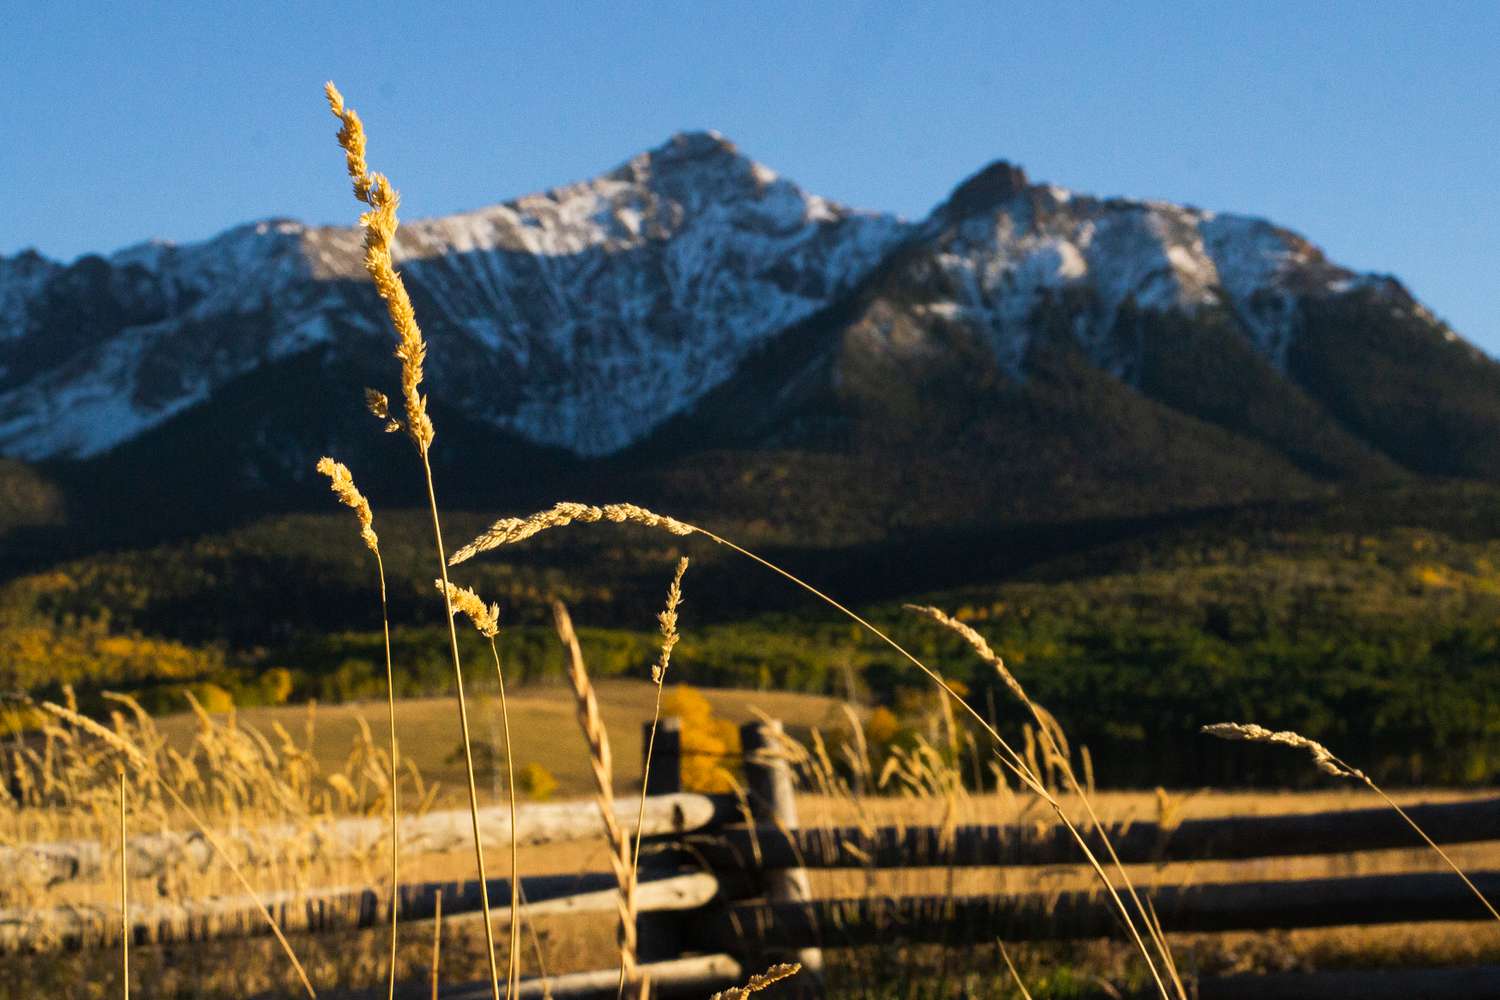 Thin wheat stalks focused in front of mountain with snowcaps